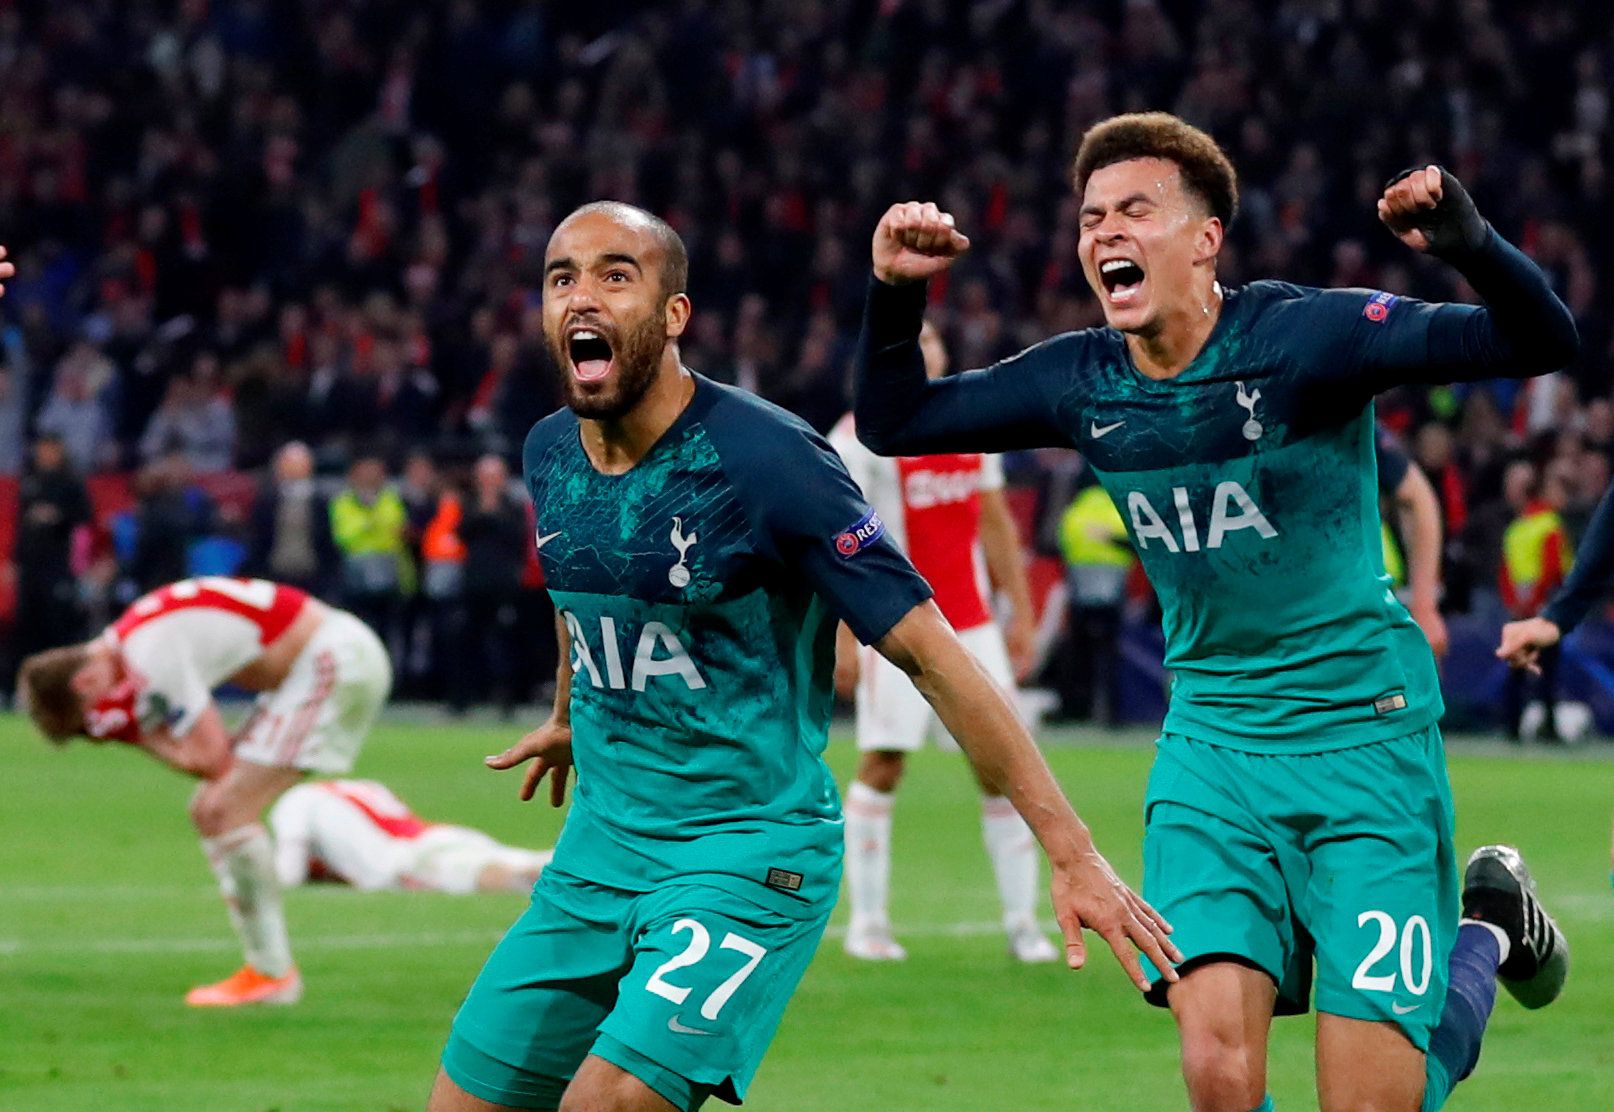 Soccer Football - Champions League Semi Final Second Leg - Ajax Amsterdam v Tottenham Hotspur - Johan Cruijff Arena, Amsterdam, Netherlands - May 8, 2019  Tottenham's Lucas Moura celebrates scoring their third goal to complete his hat-trick with Dele Alli    Action Images via Reuters/Matthew Childs       TPX IMAGES OF THE DAY